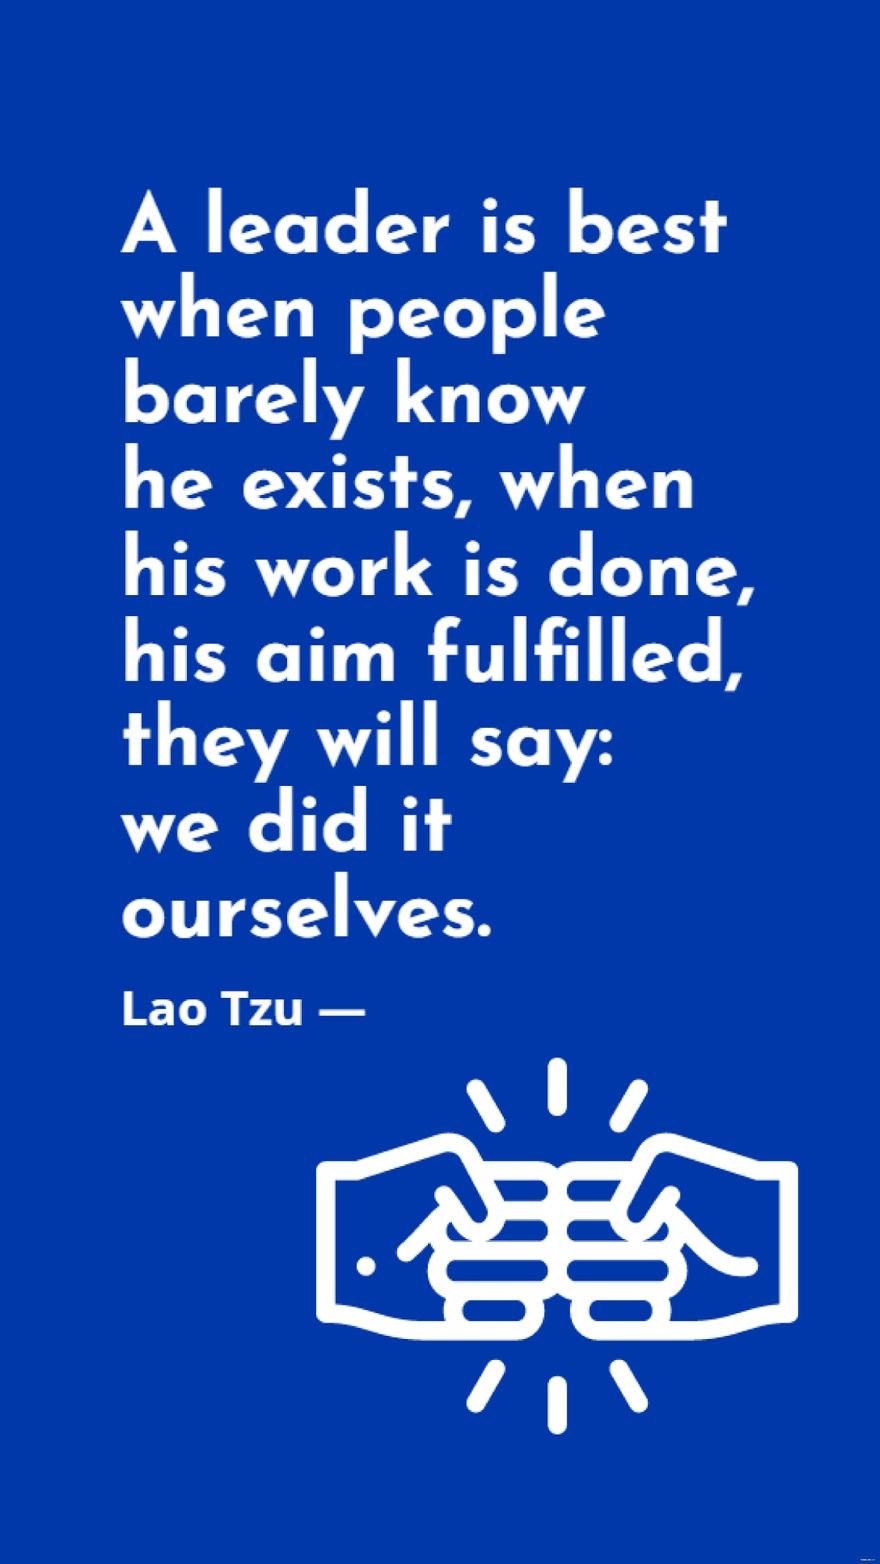 Free Lao Tzu - A leader is best when people barely know he exists, when his work is done, his aim fulfilled, they will say: we did it ourselves. in JPG